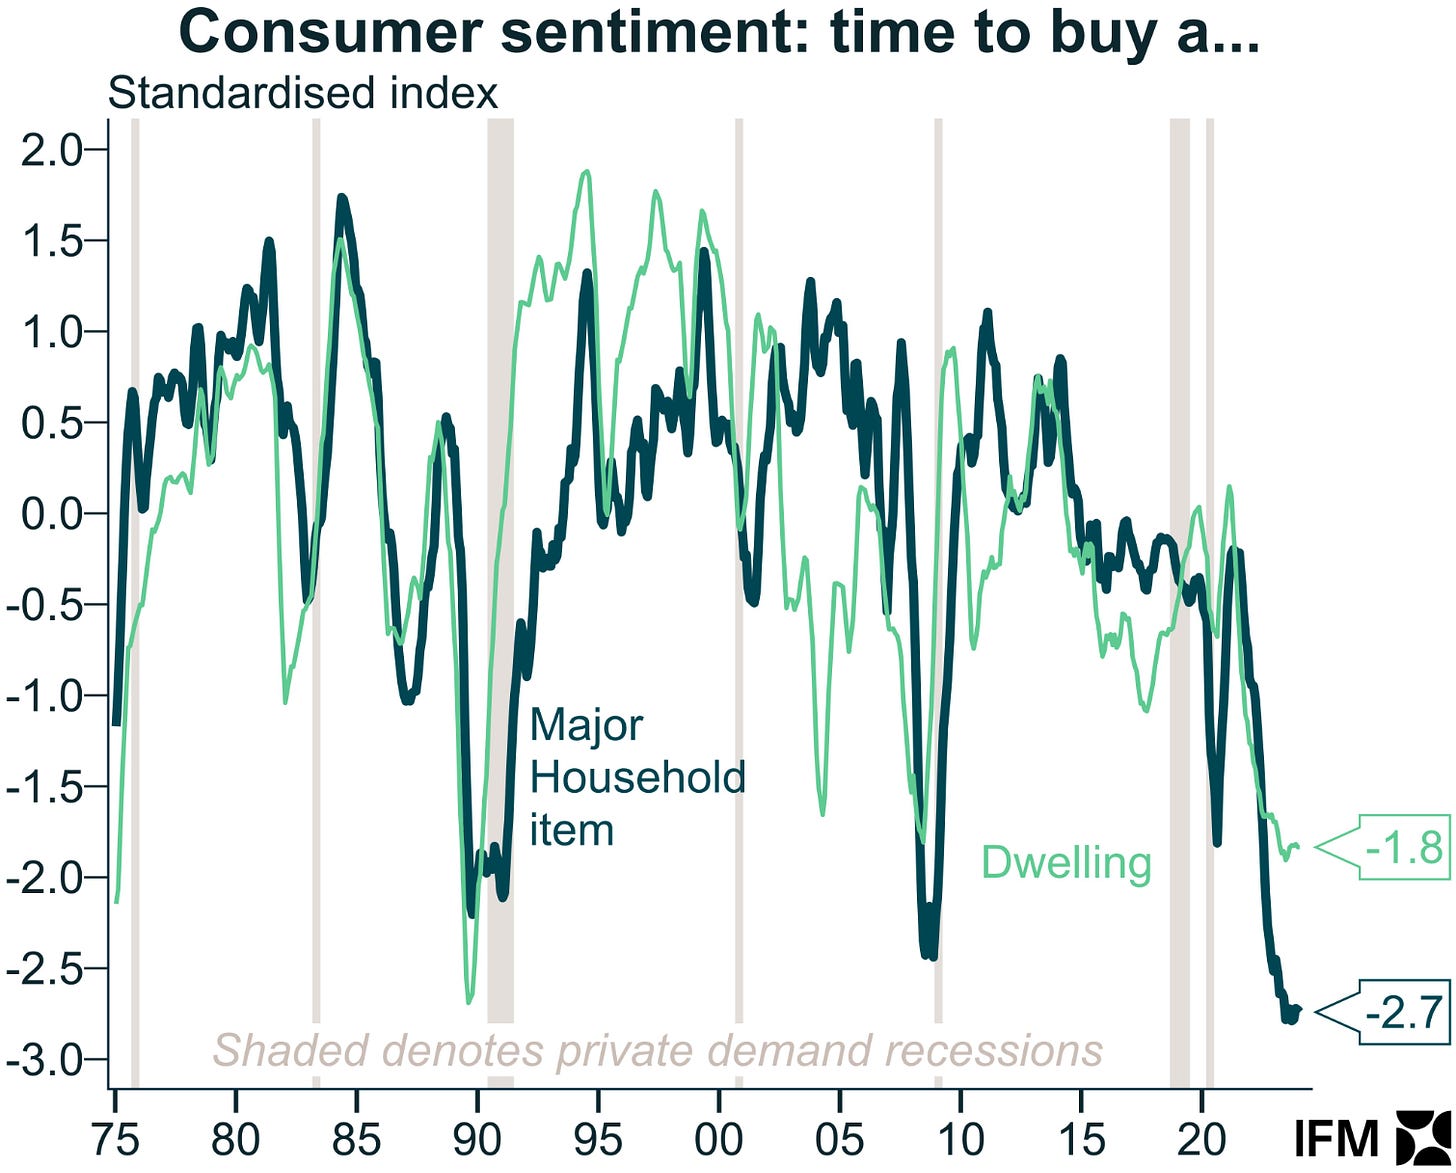 Consumer sentiment to buy a house